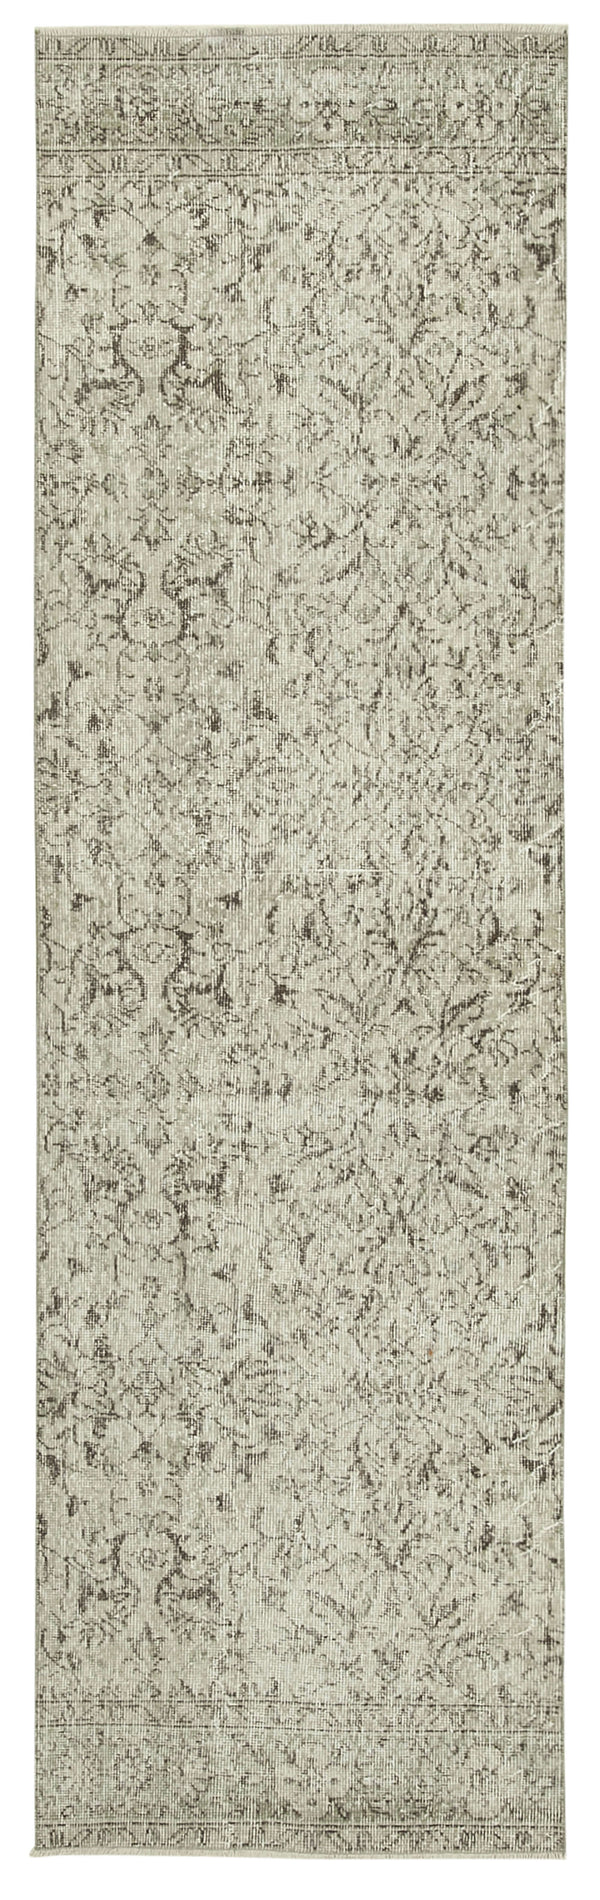 Handmade Overdyed Runner > Design# OL-AC-38168 > Size: 2'-8" x 8'-11", Carpet Culture Rugs, Handmade Rugs, NYC Rugs, New Rugs, Shop Rugs, Rug Store, Outlet Rugs, SoHo Rugs, Rugs in USA